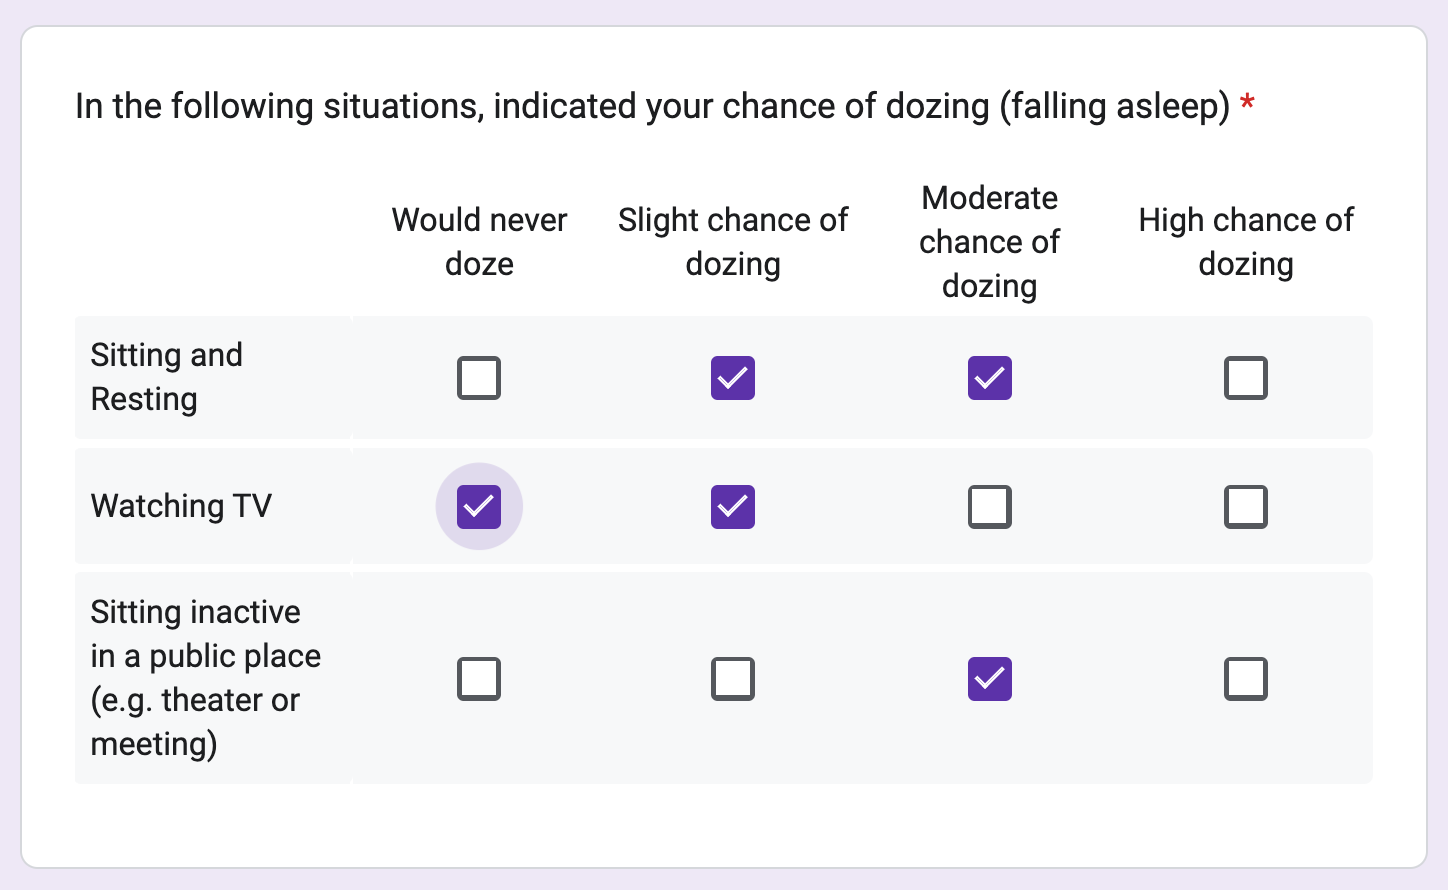 Example of a checkbox grid survey question